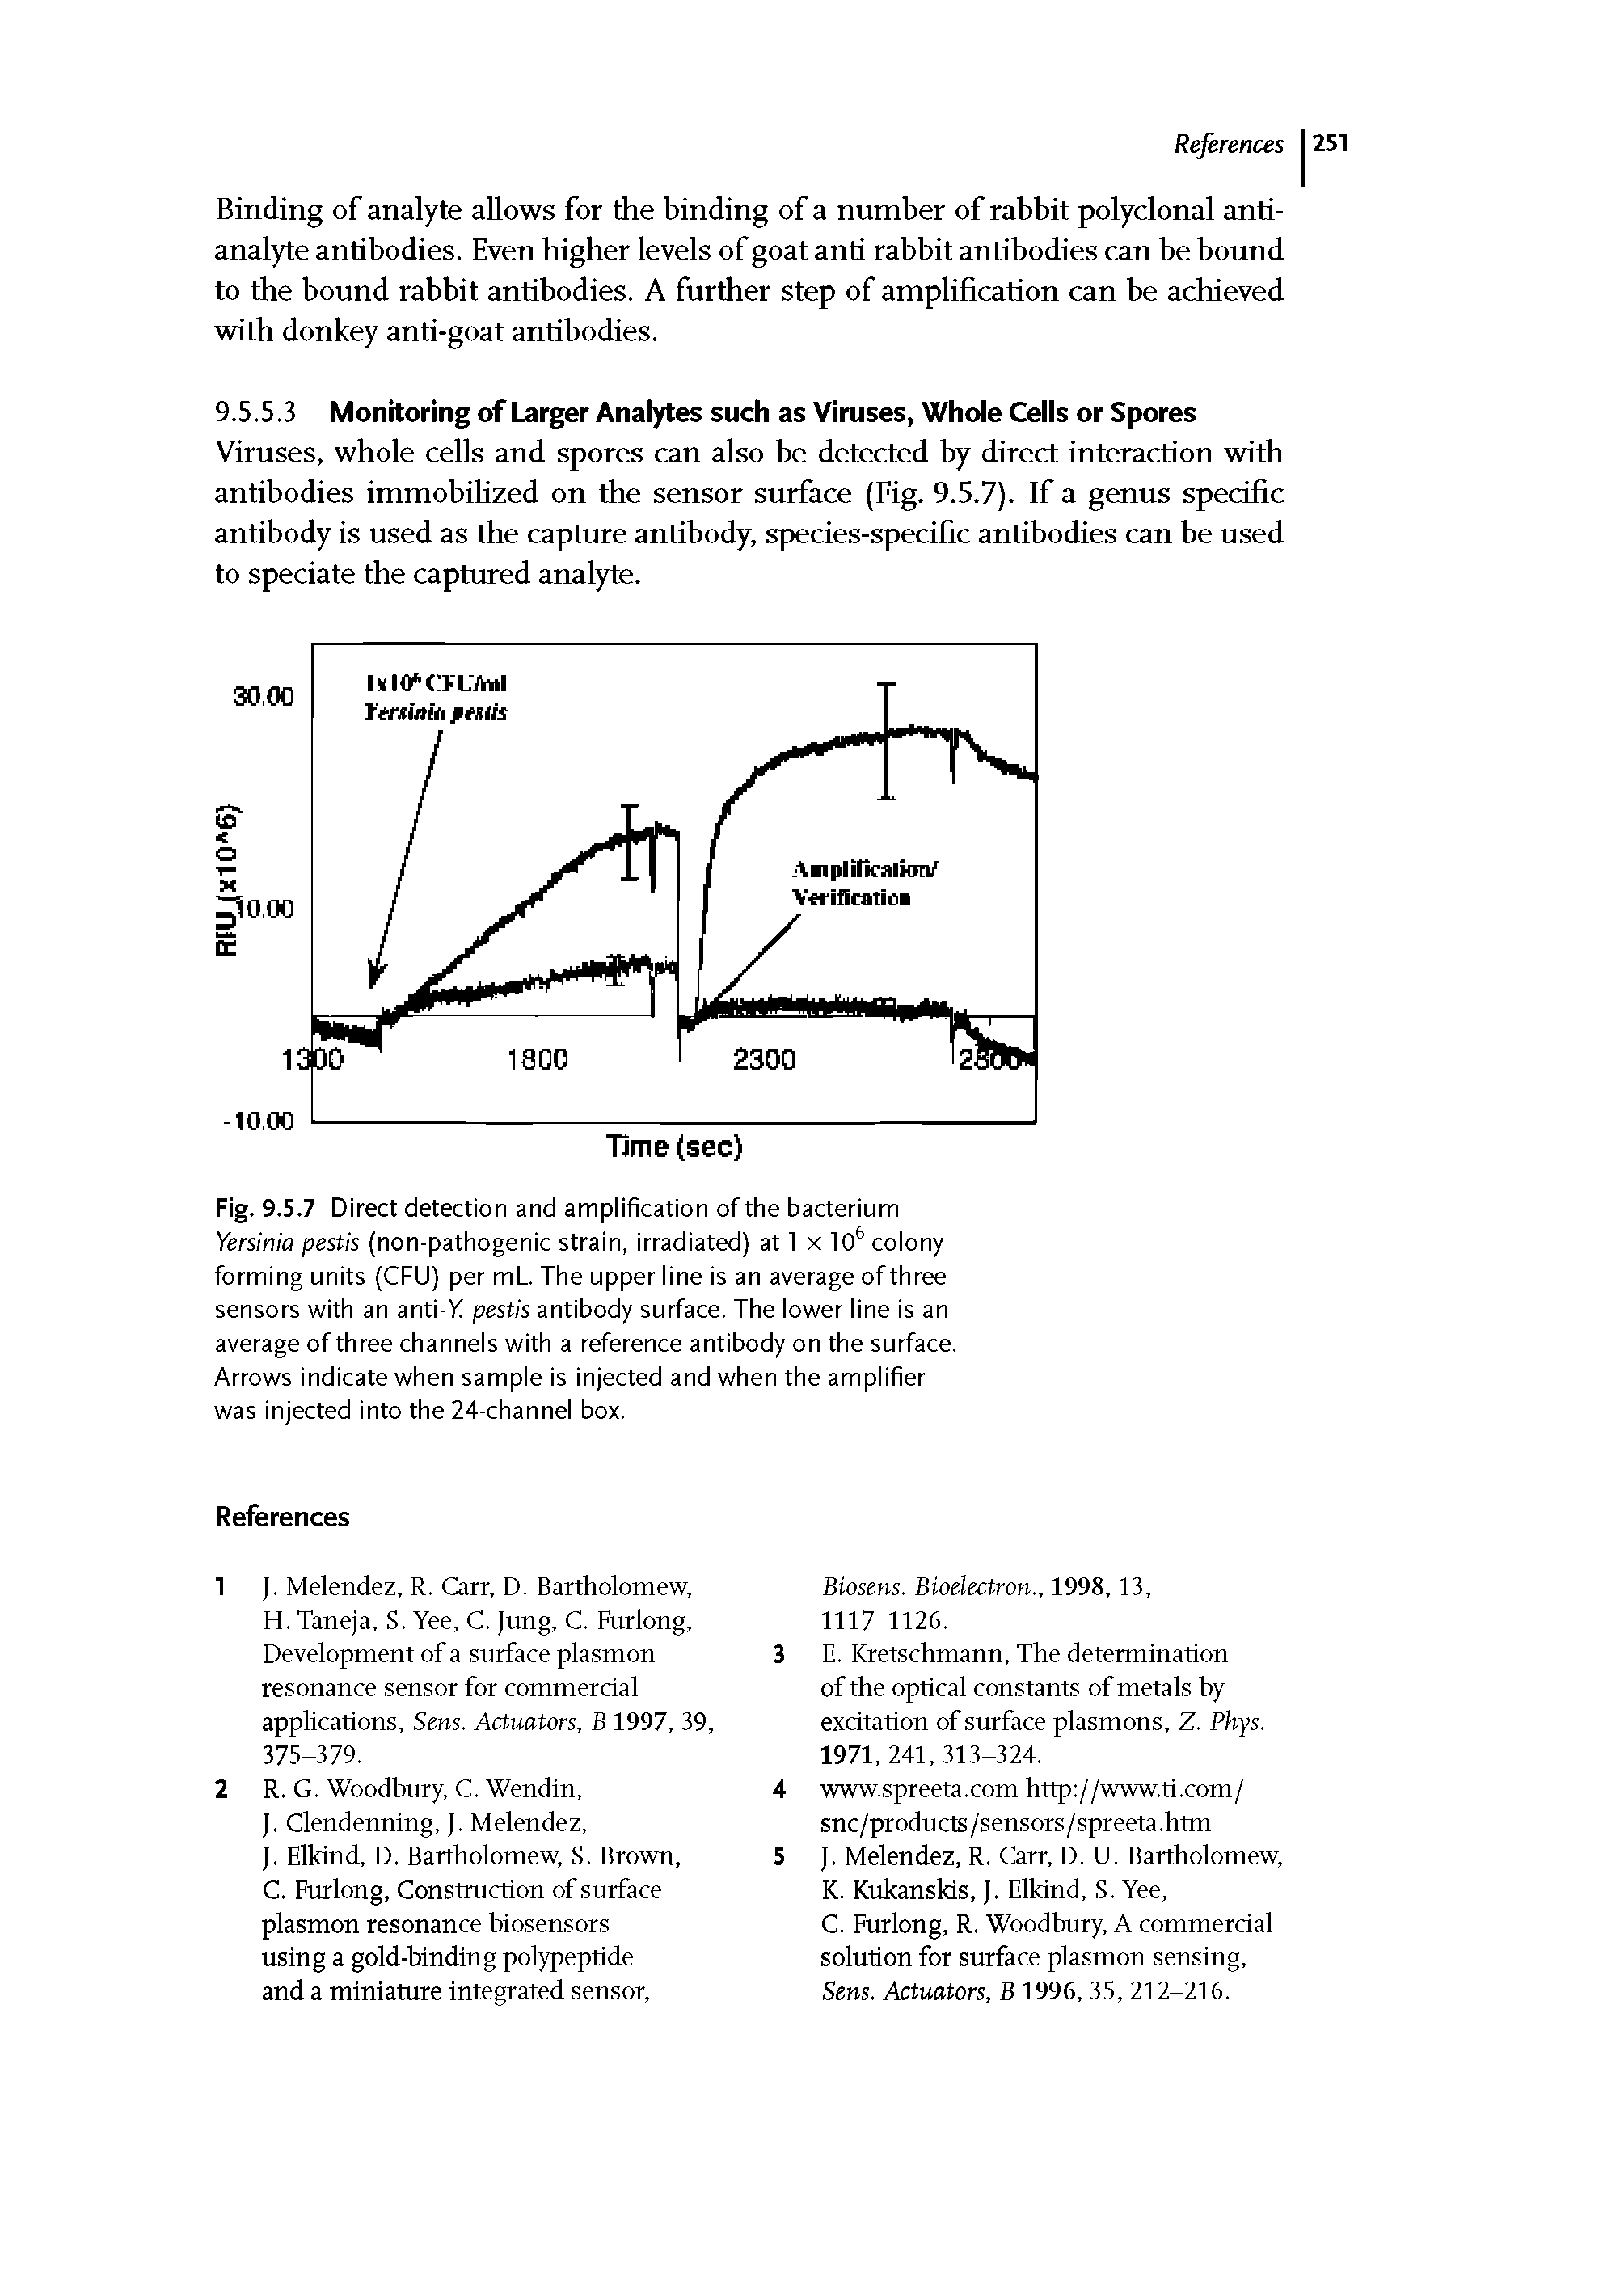 Fig. 9.5.7 Direct detection and amplification of the bacterium Yersinia pestis (non-pathogenic strain, irradiated) at 1 x 10 colony forming units (CFU) per mt. The upper line is an average of three sensors with an anti-Vf pestis antibody surface. The lower line is an average of three channels with a reference antibody on the surface. Arrows indicate when sample is injected and when the amplifier was injected into the 24-channel box.